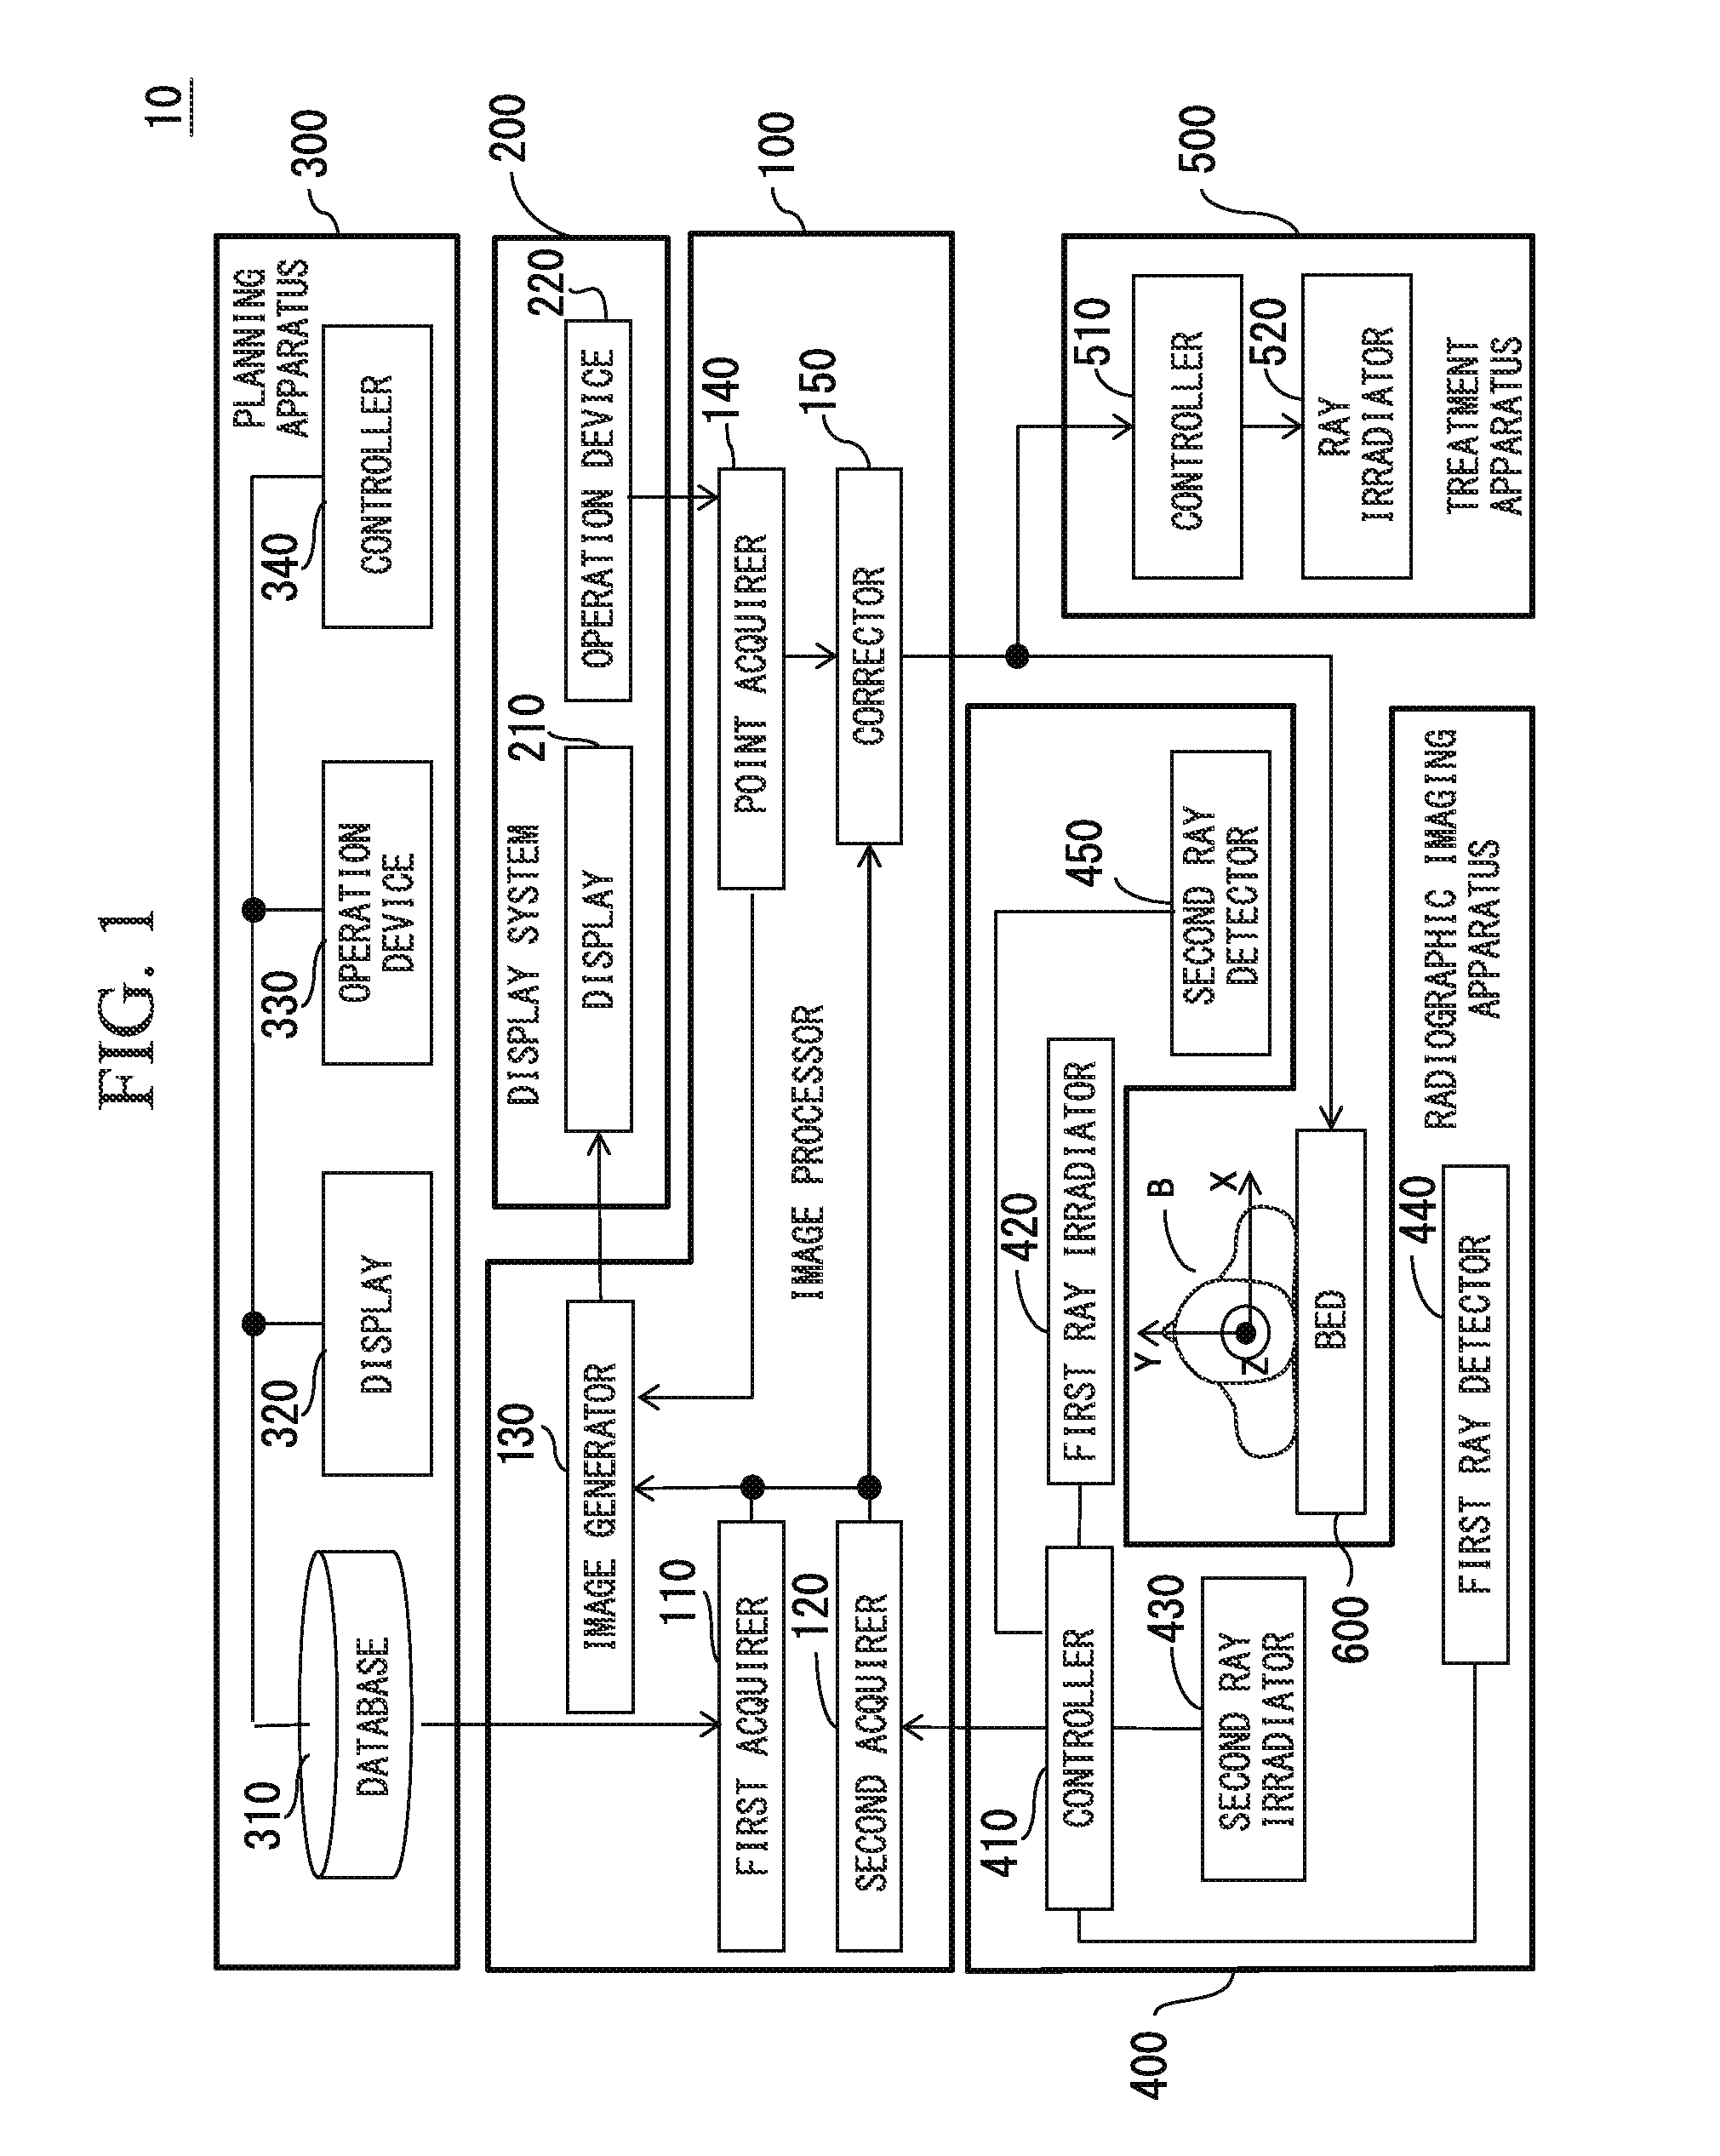 Image processor, treatment system, and image processing method